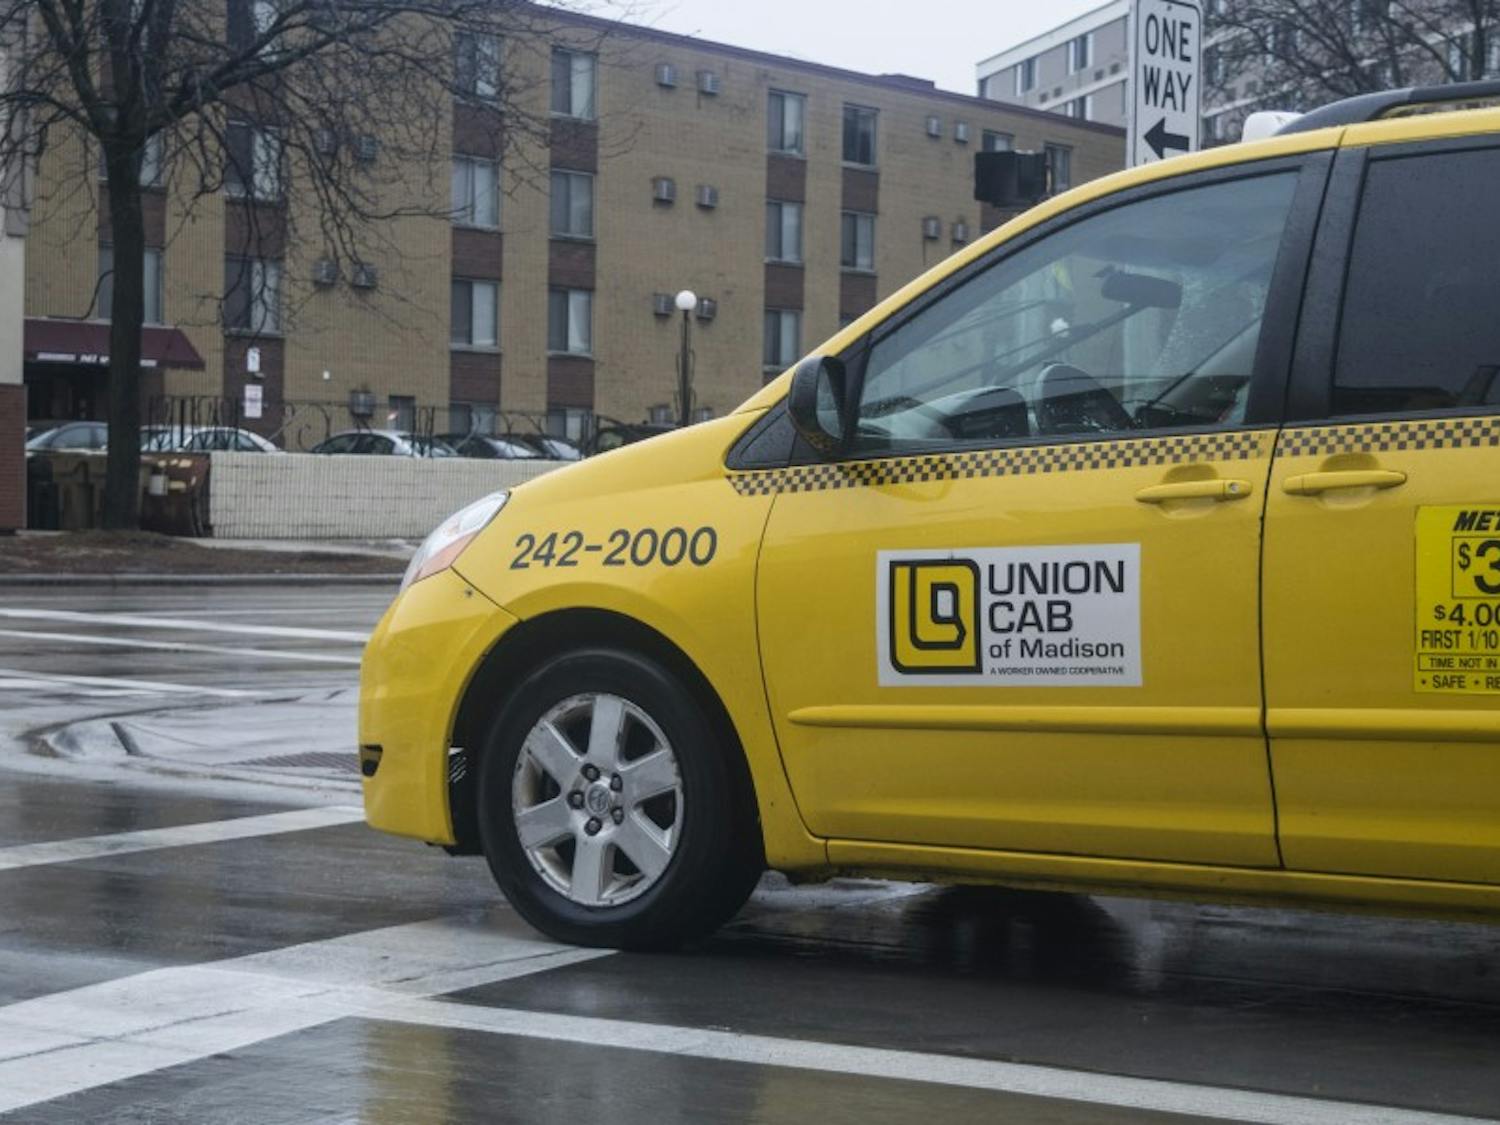 With rising competition from companies like Uber and Lyft Madison’s Union Cab has worked to change its business model and stay afloat.